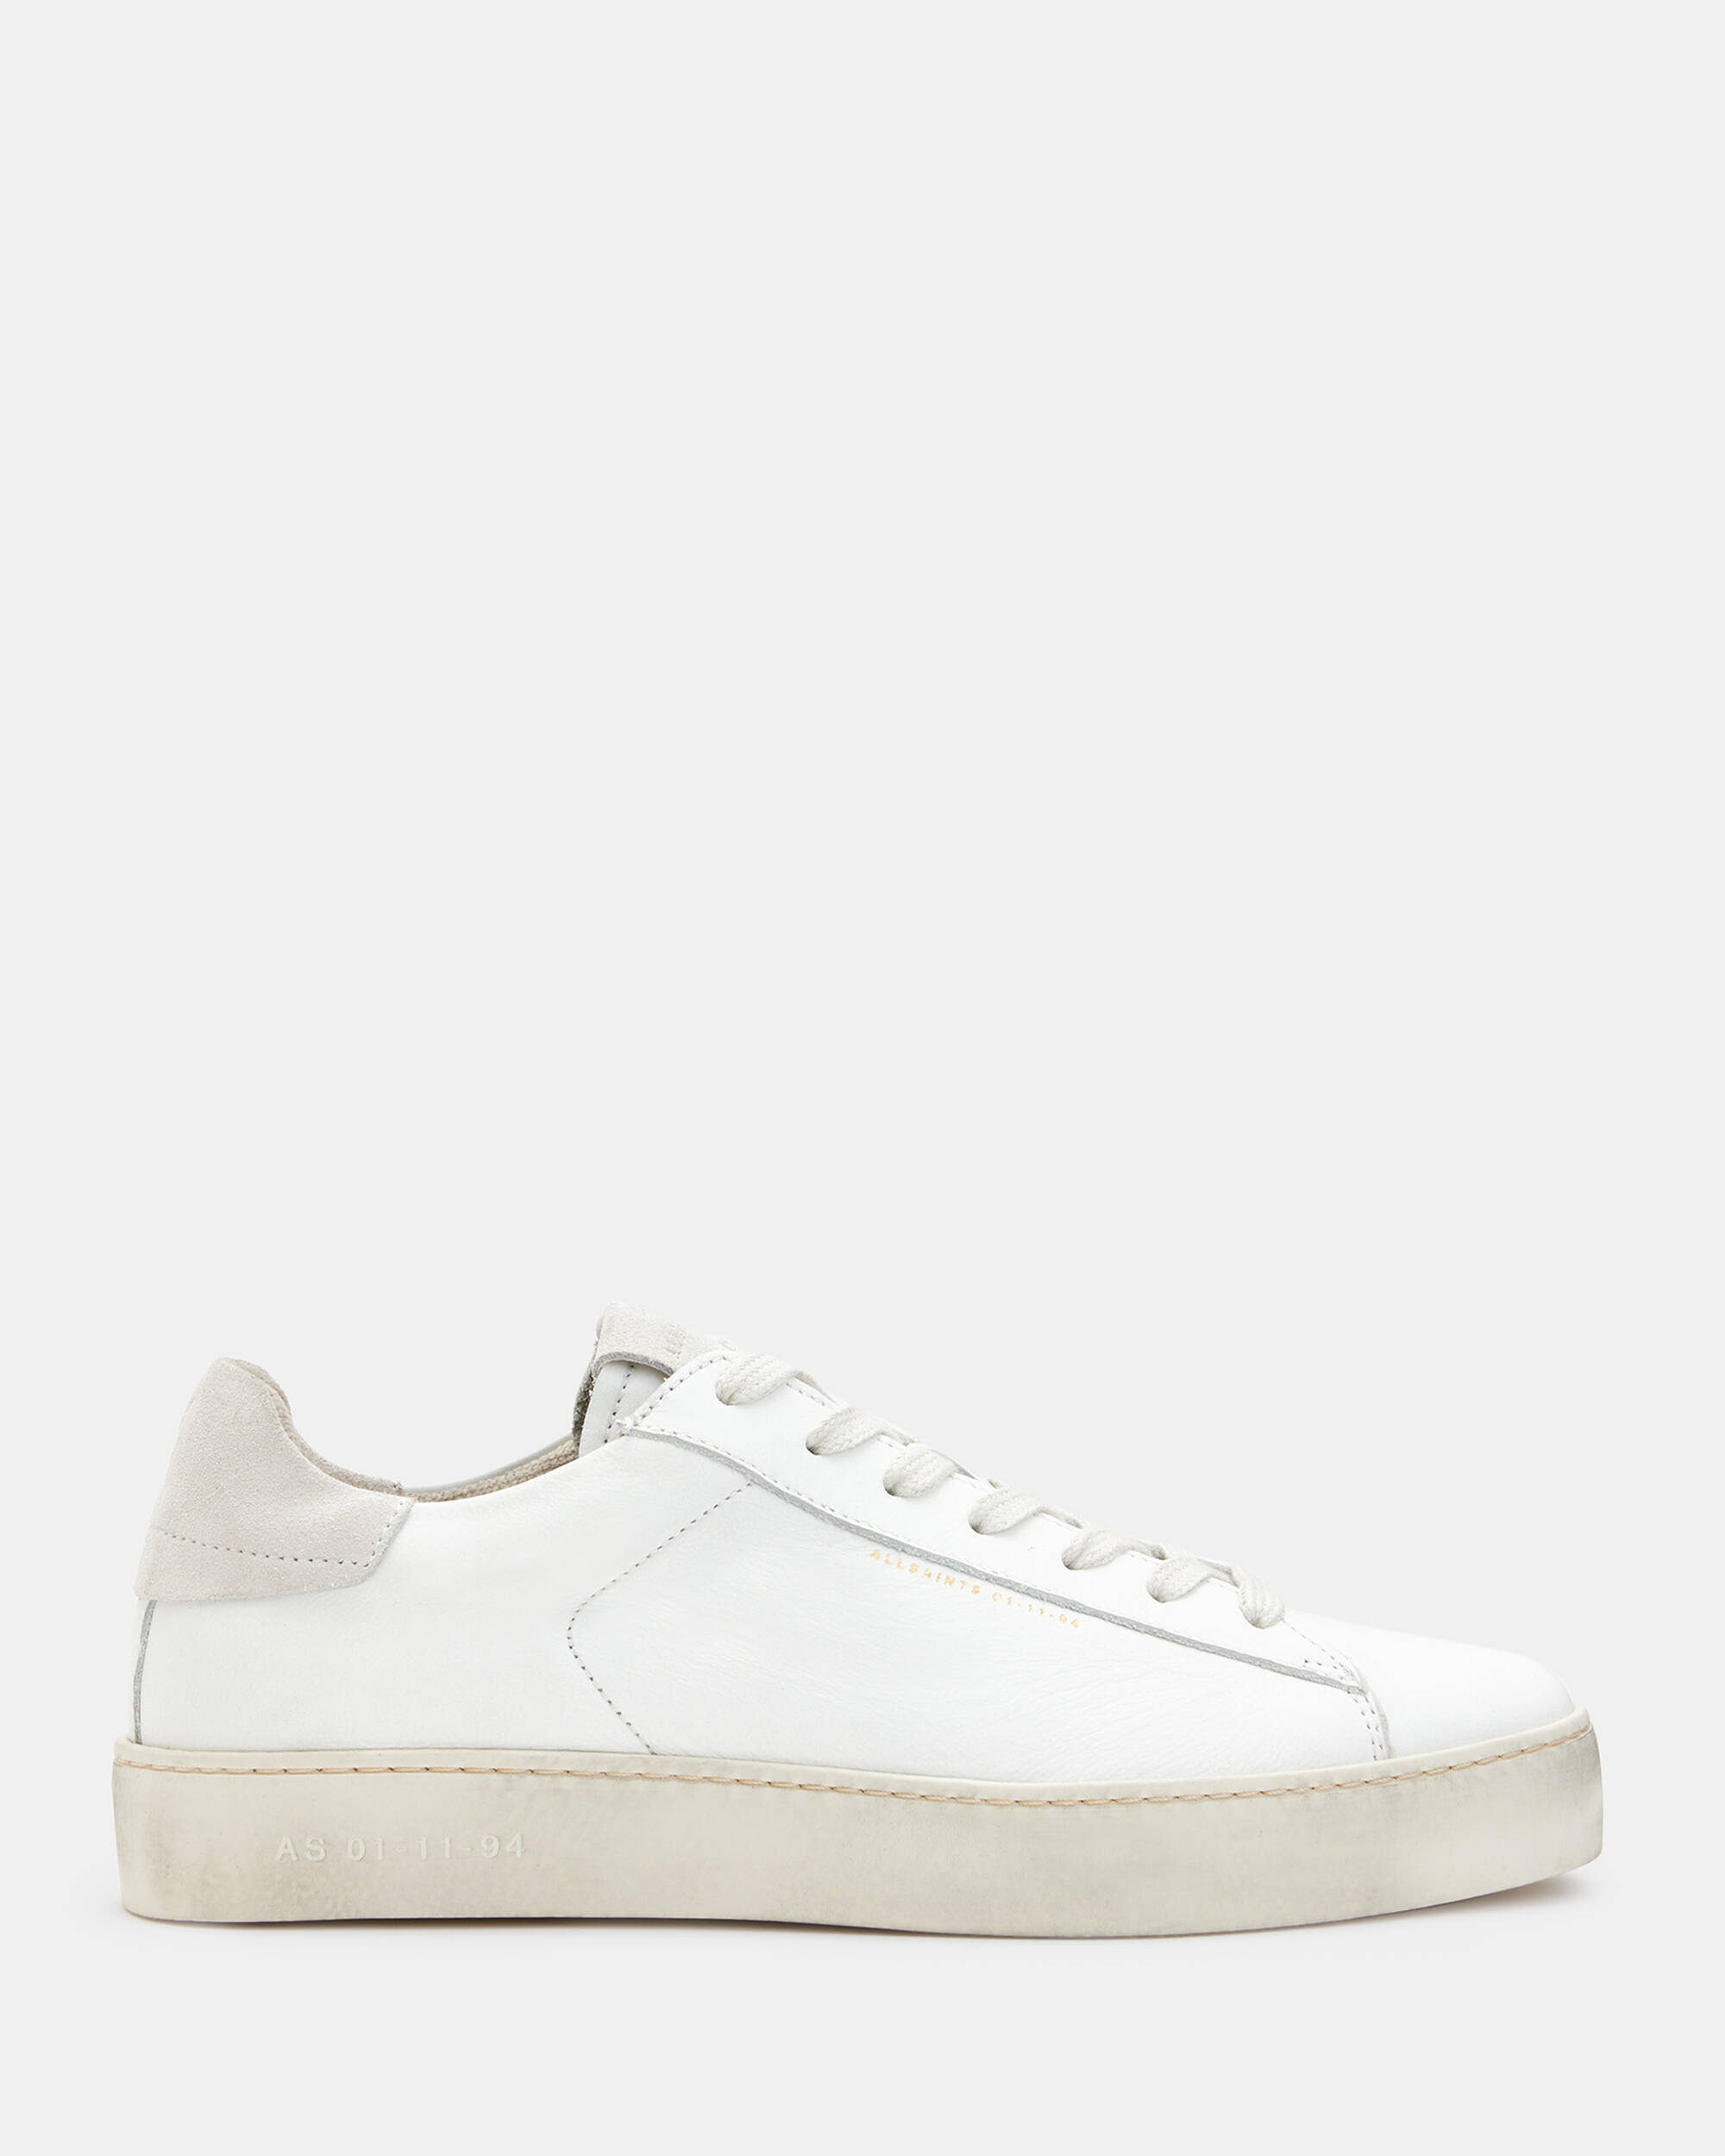 Shana Round Toe Leather Sneakers  large image number 1